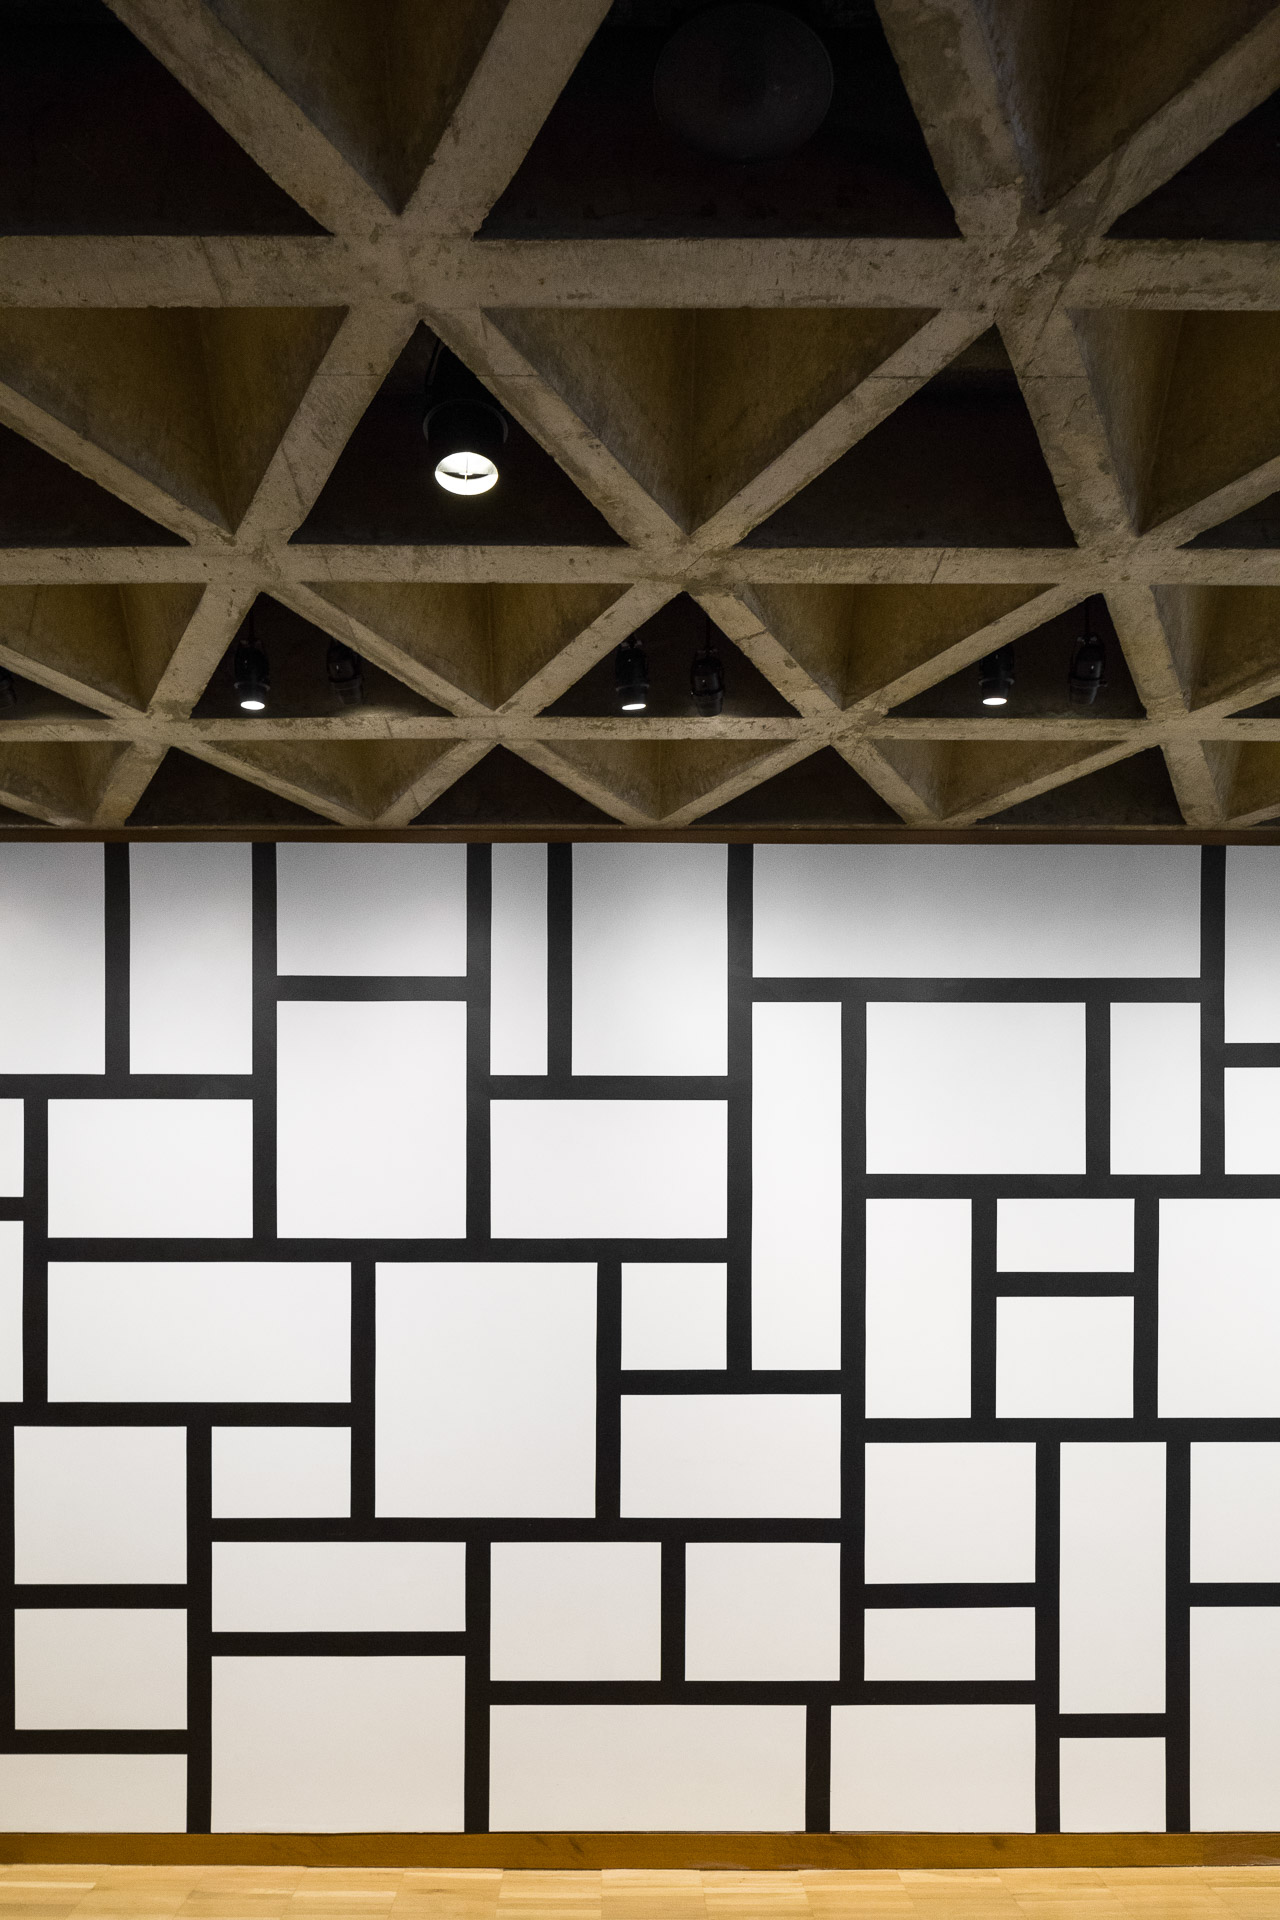 Interior of Yale University Art Gallery in New Haven, CT by Louis Kahn. Mural by Sol LeWitt. Photo by Jason R. Woods.